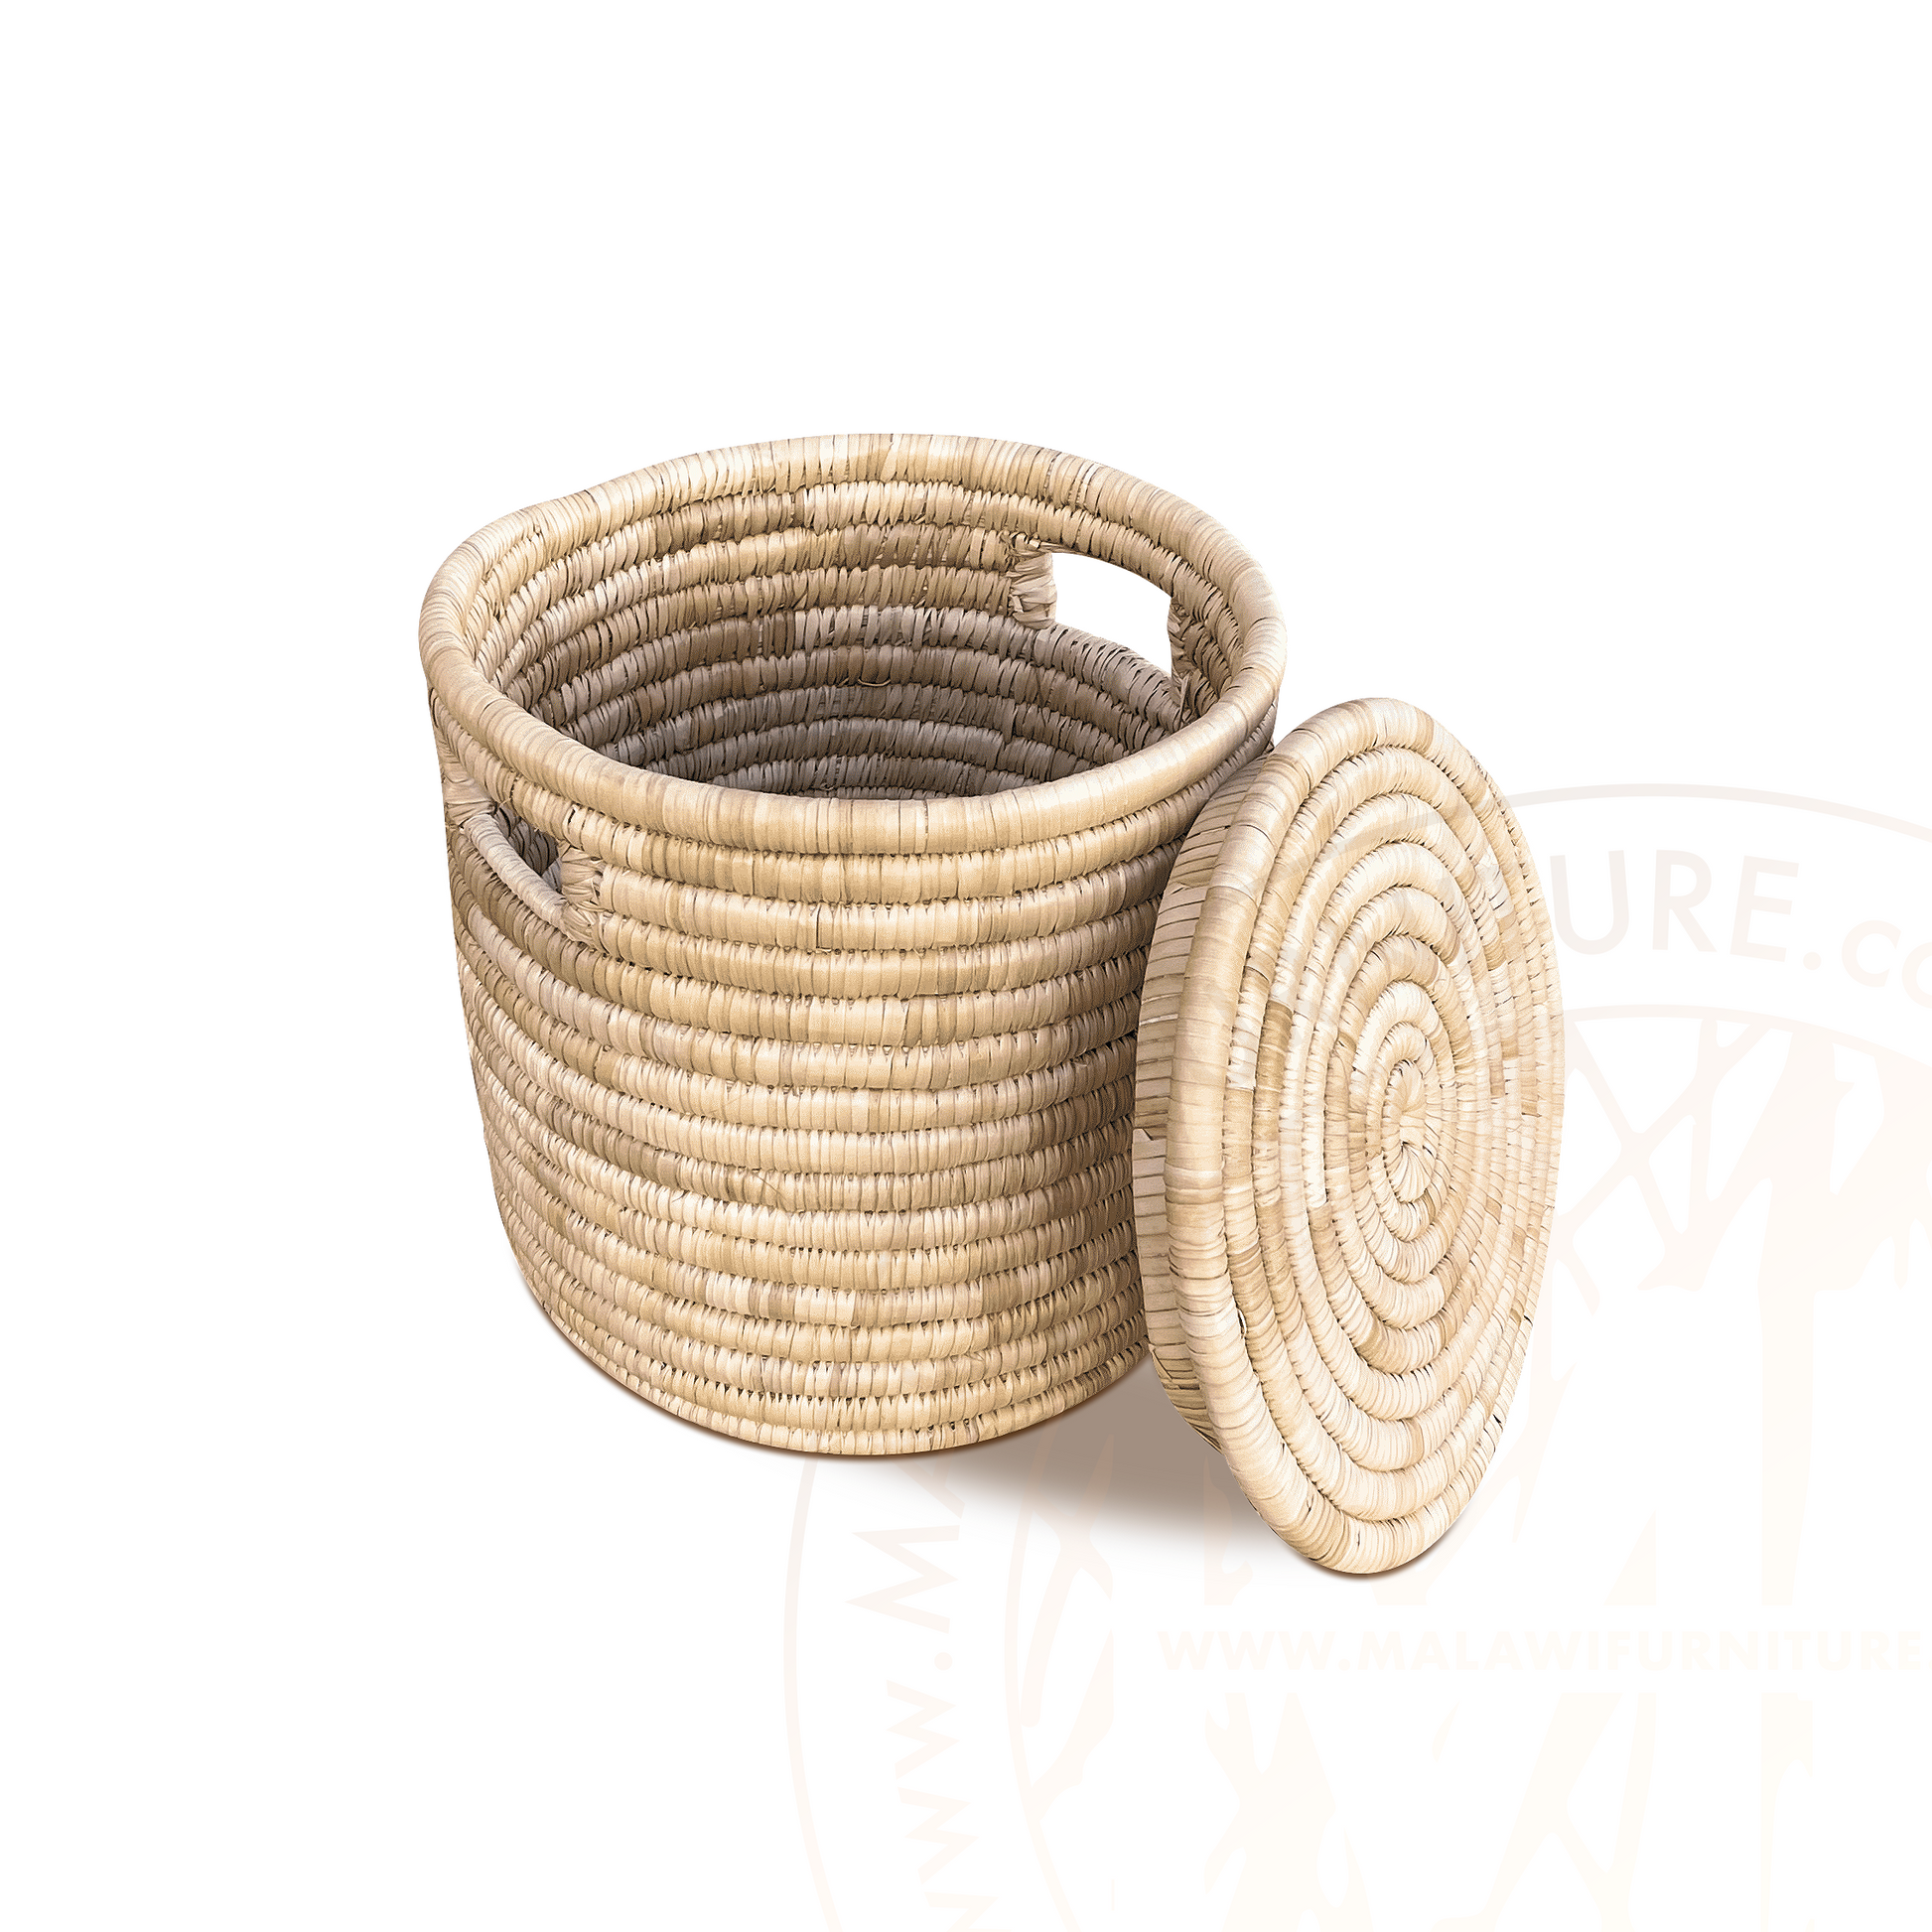 Malawi Laundry Baskets (SET OF 3) Storage Toys Towels Linen Box Weave Woven Basket - Small open